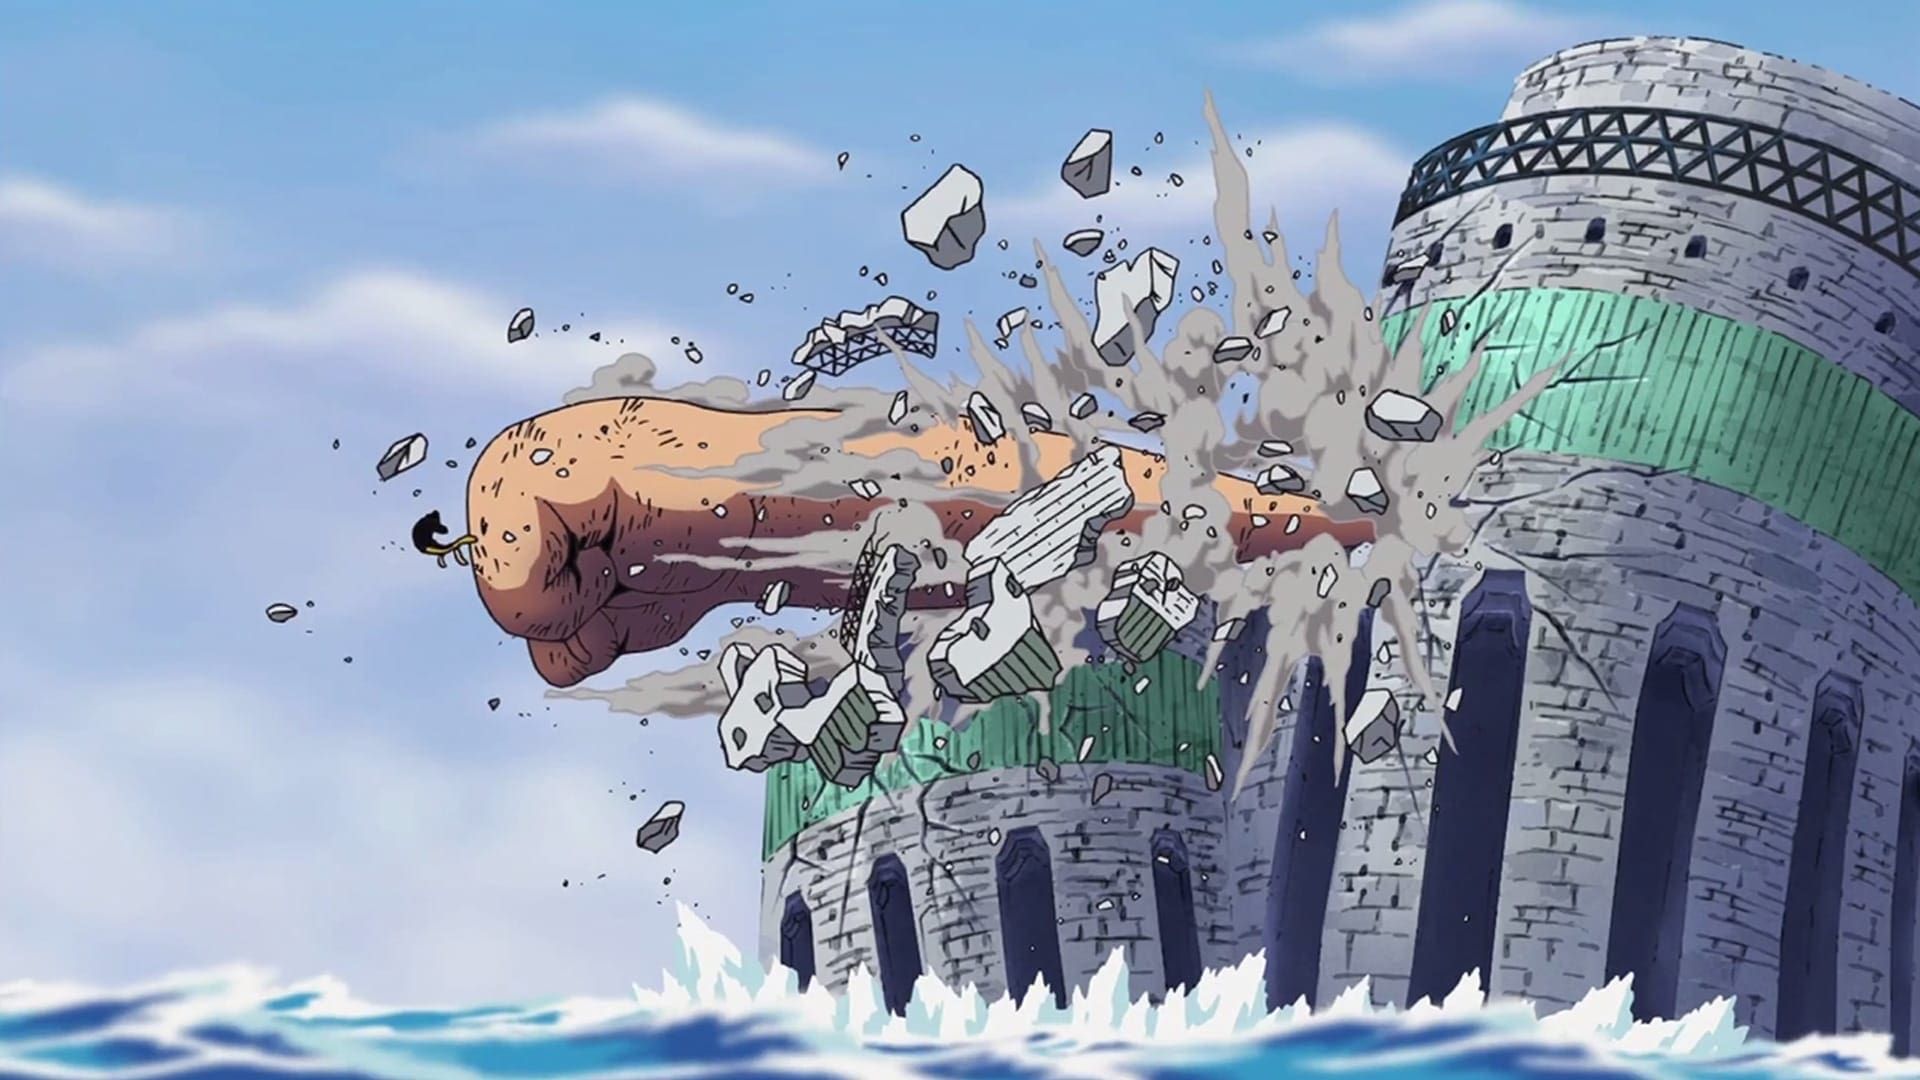 One Piece · Episode 10 · Episode of Merry: The Tale of One More